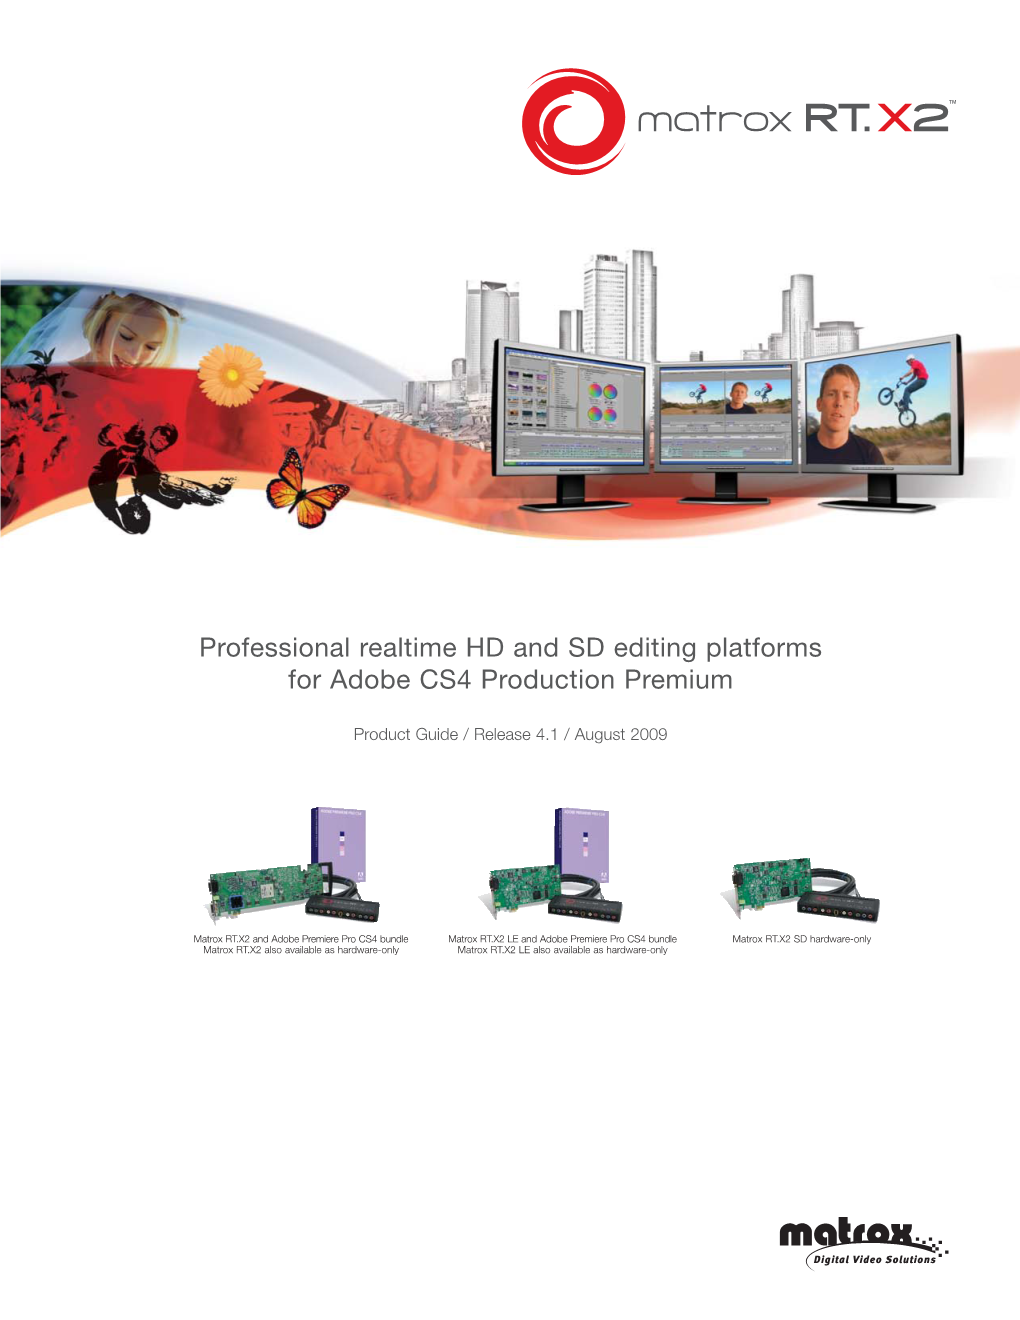 Professional Realtime HD and SD Editing Platforms for Adobe CS4 Production Premium